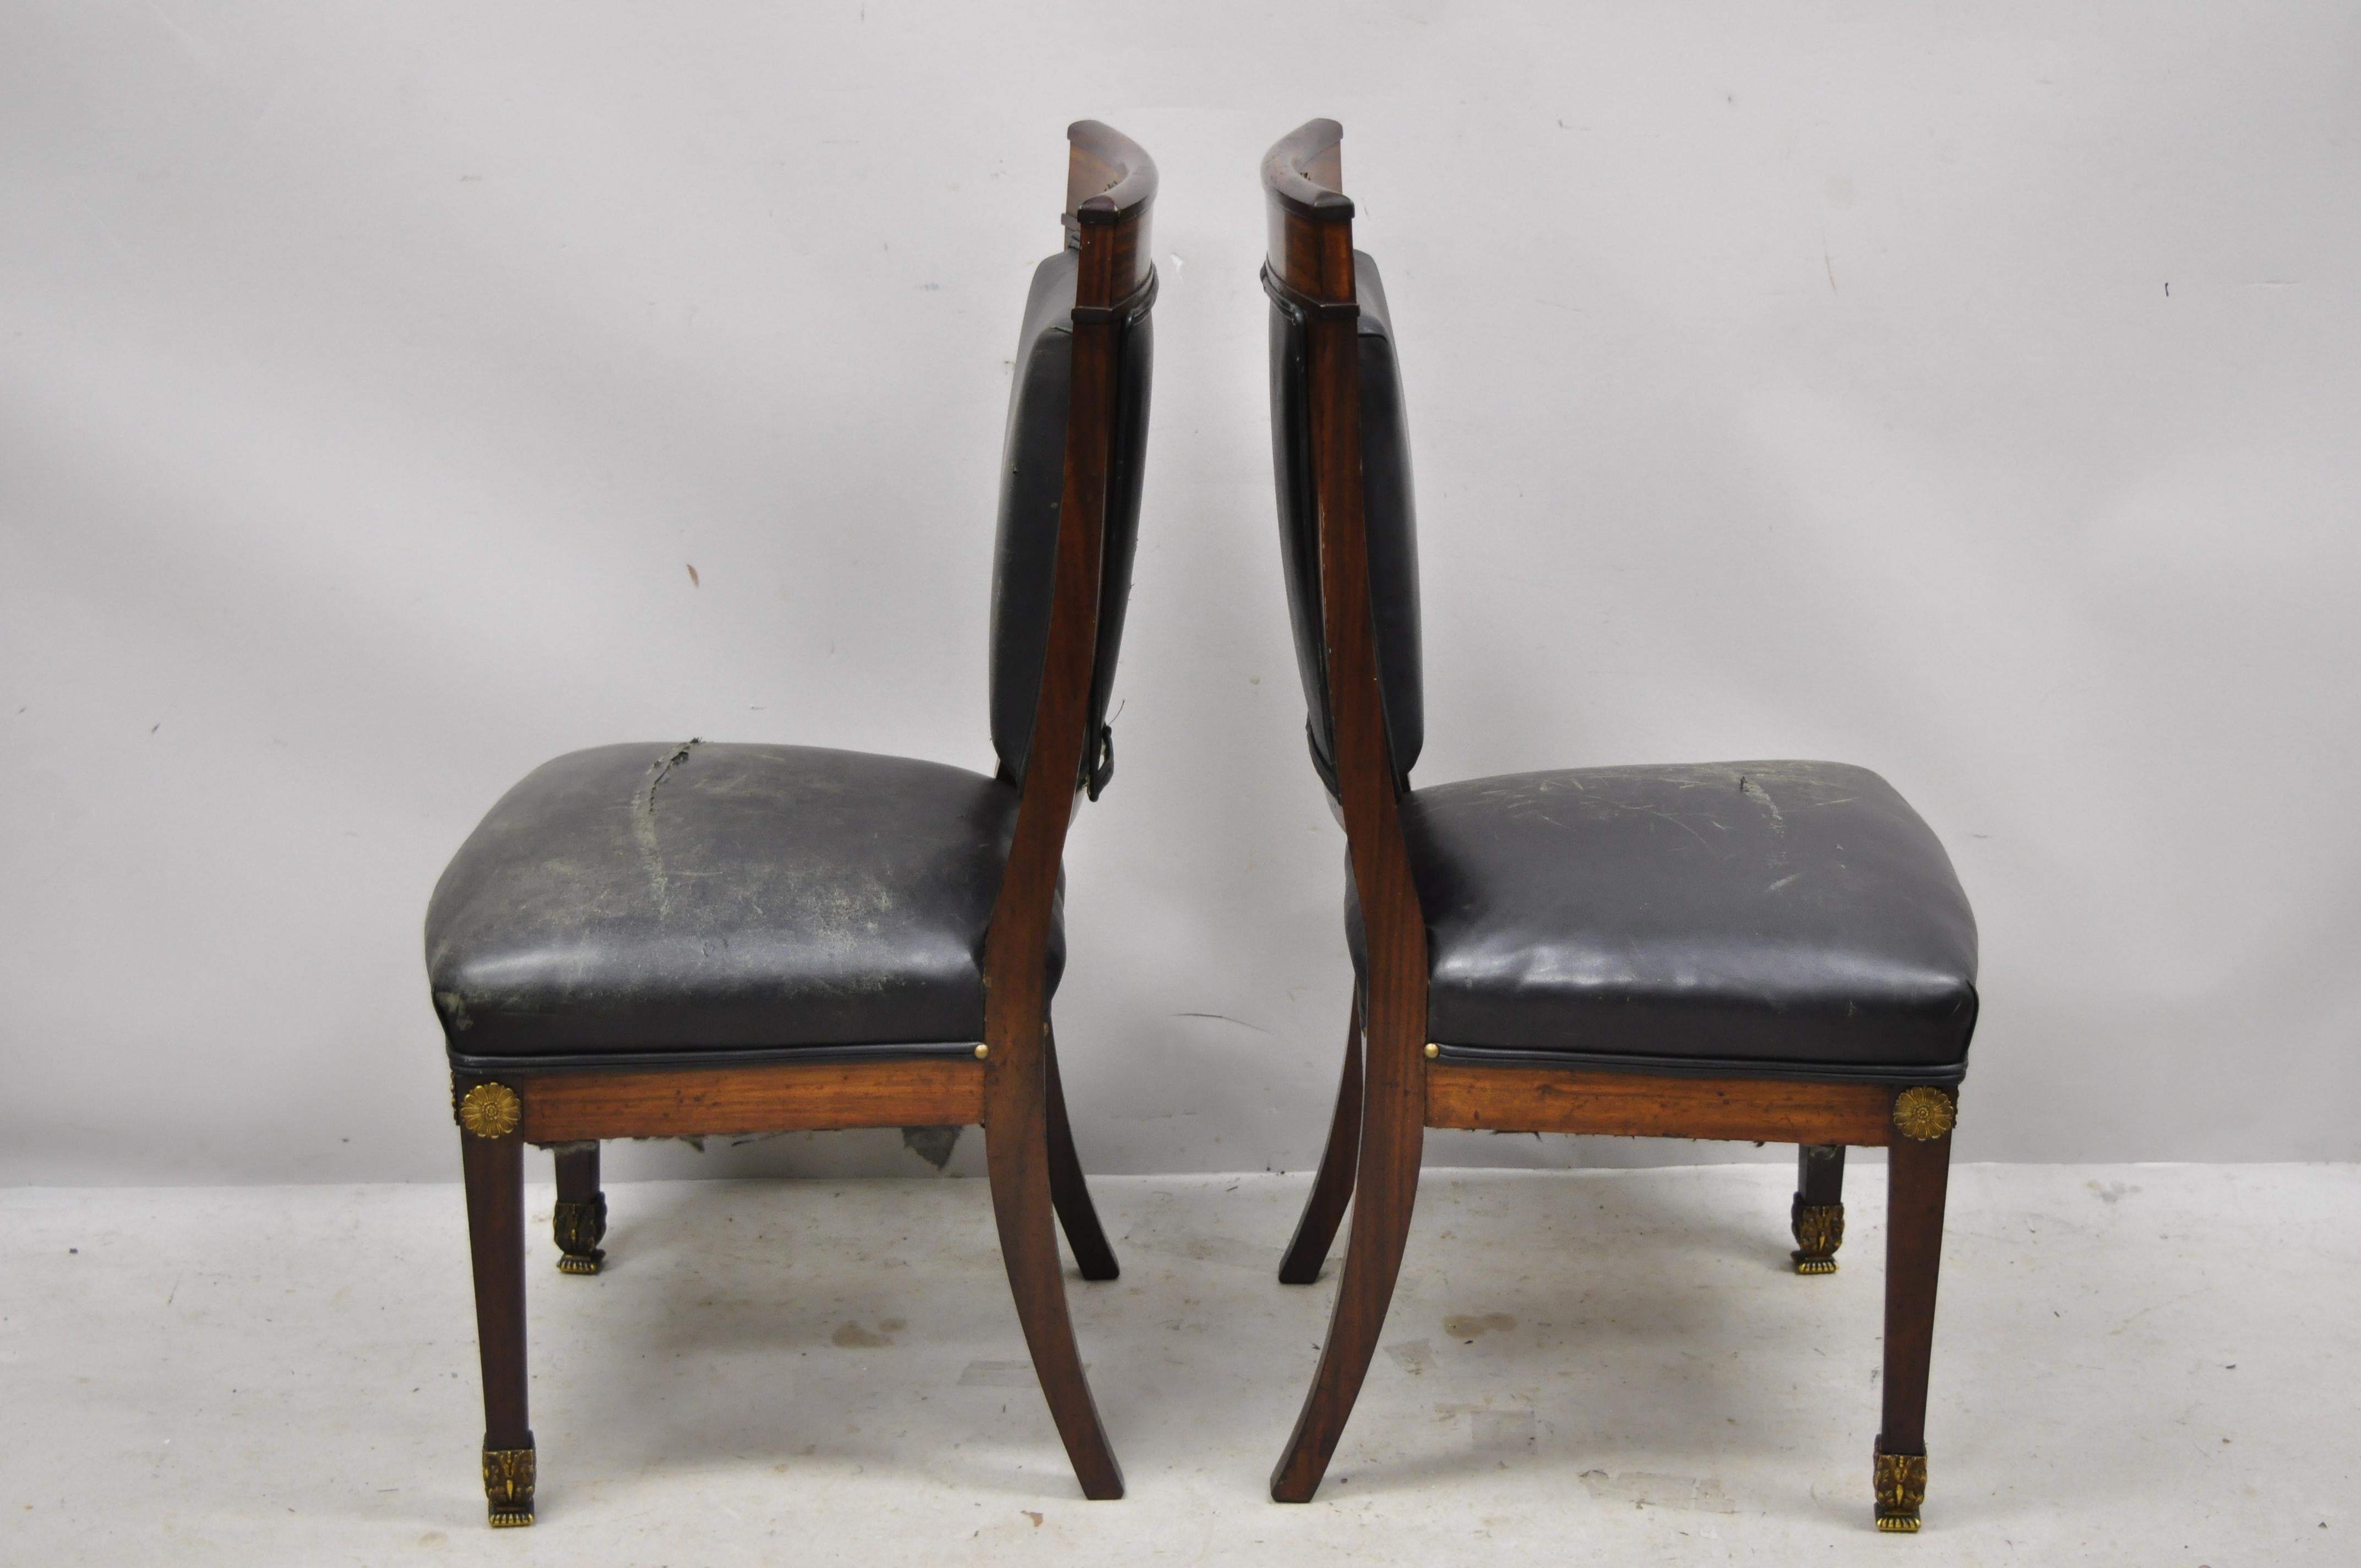 French Empire Solid Mahogany Regency Side Chairs Figural Bronze Ormolu, a Pair For Sale 2